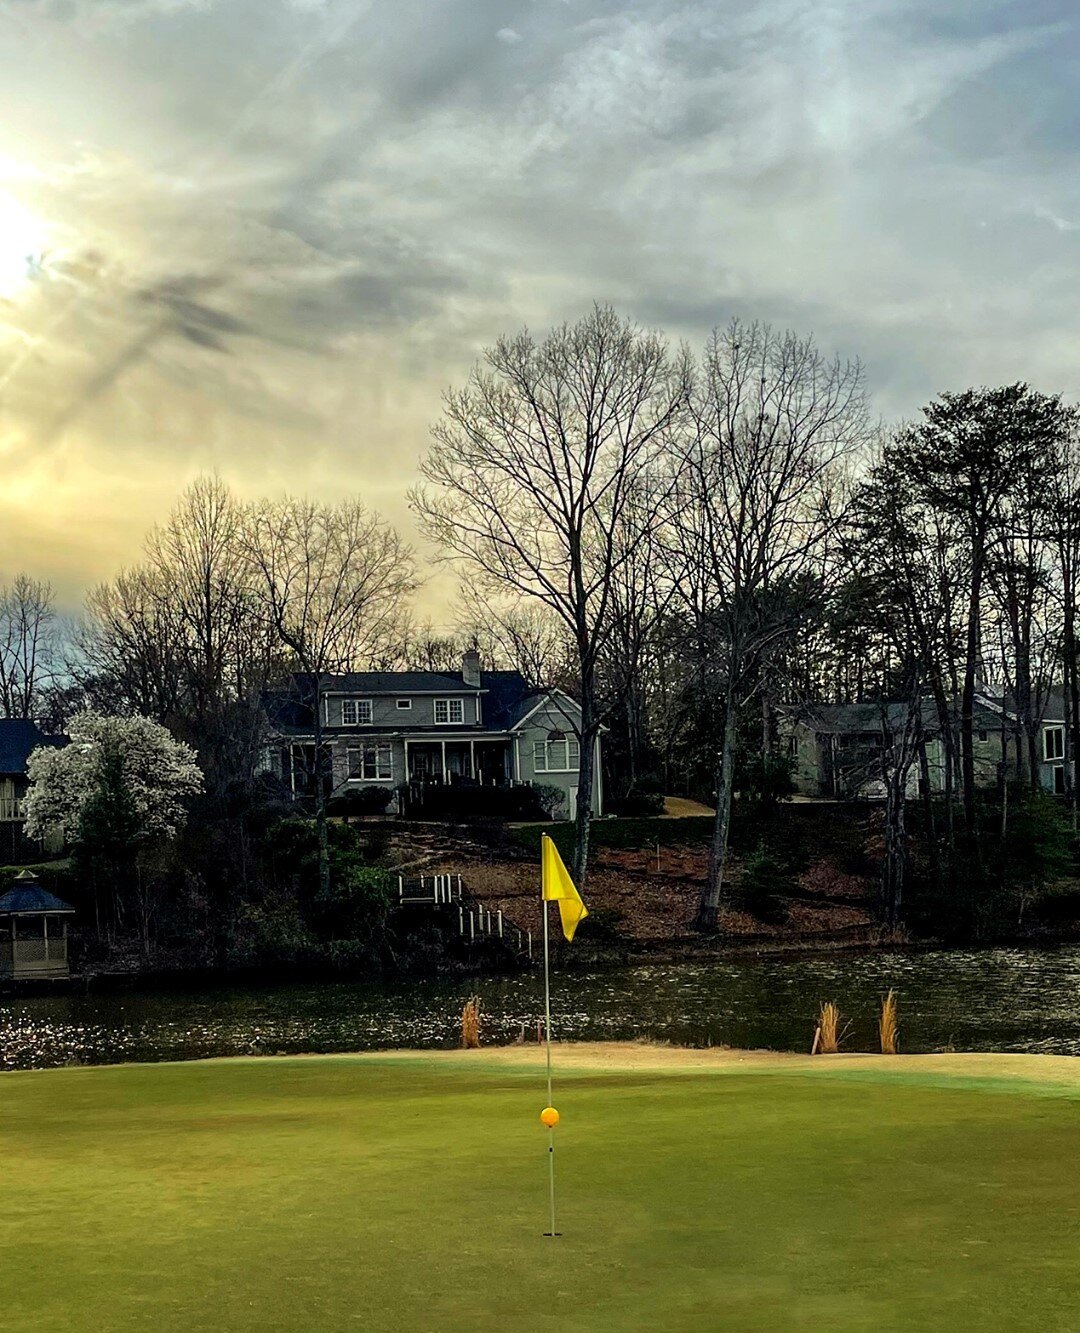 It's a beautiful morning at Pebble Creek as we gear up for a fun weekend of play! We have a few tee times still available for this weekend- click the link in our bio or call our pro shop at (864) 244-8937 to book yours!